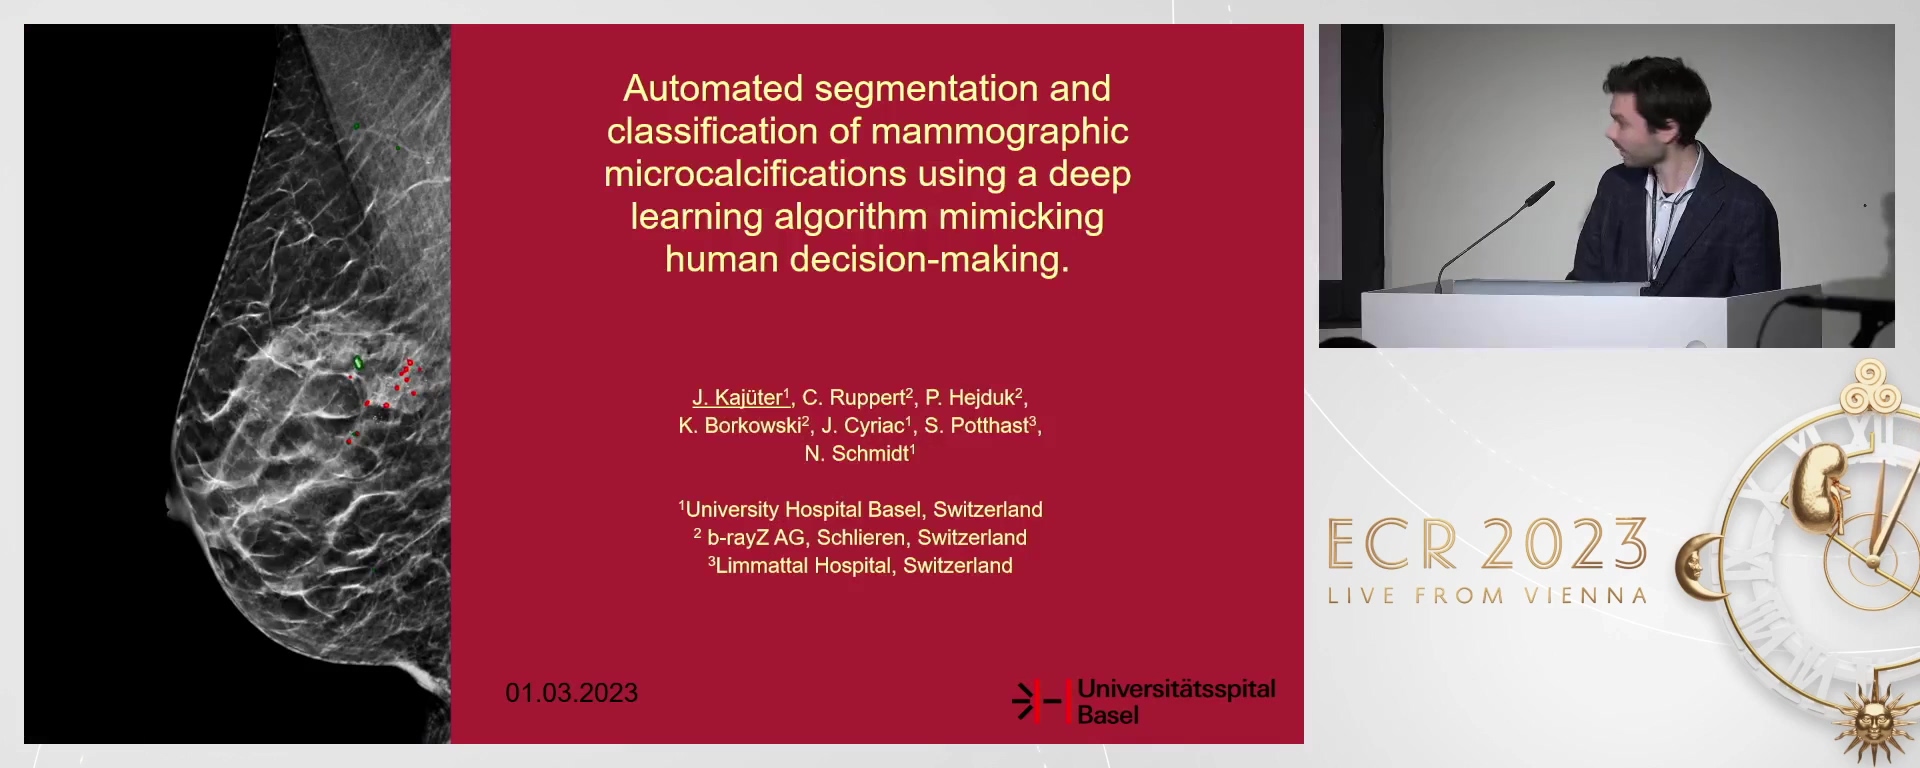 Automated segmentation and classification of mammographic microcalcifications using a deep learning algorithm mimicking human decision-making